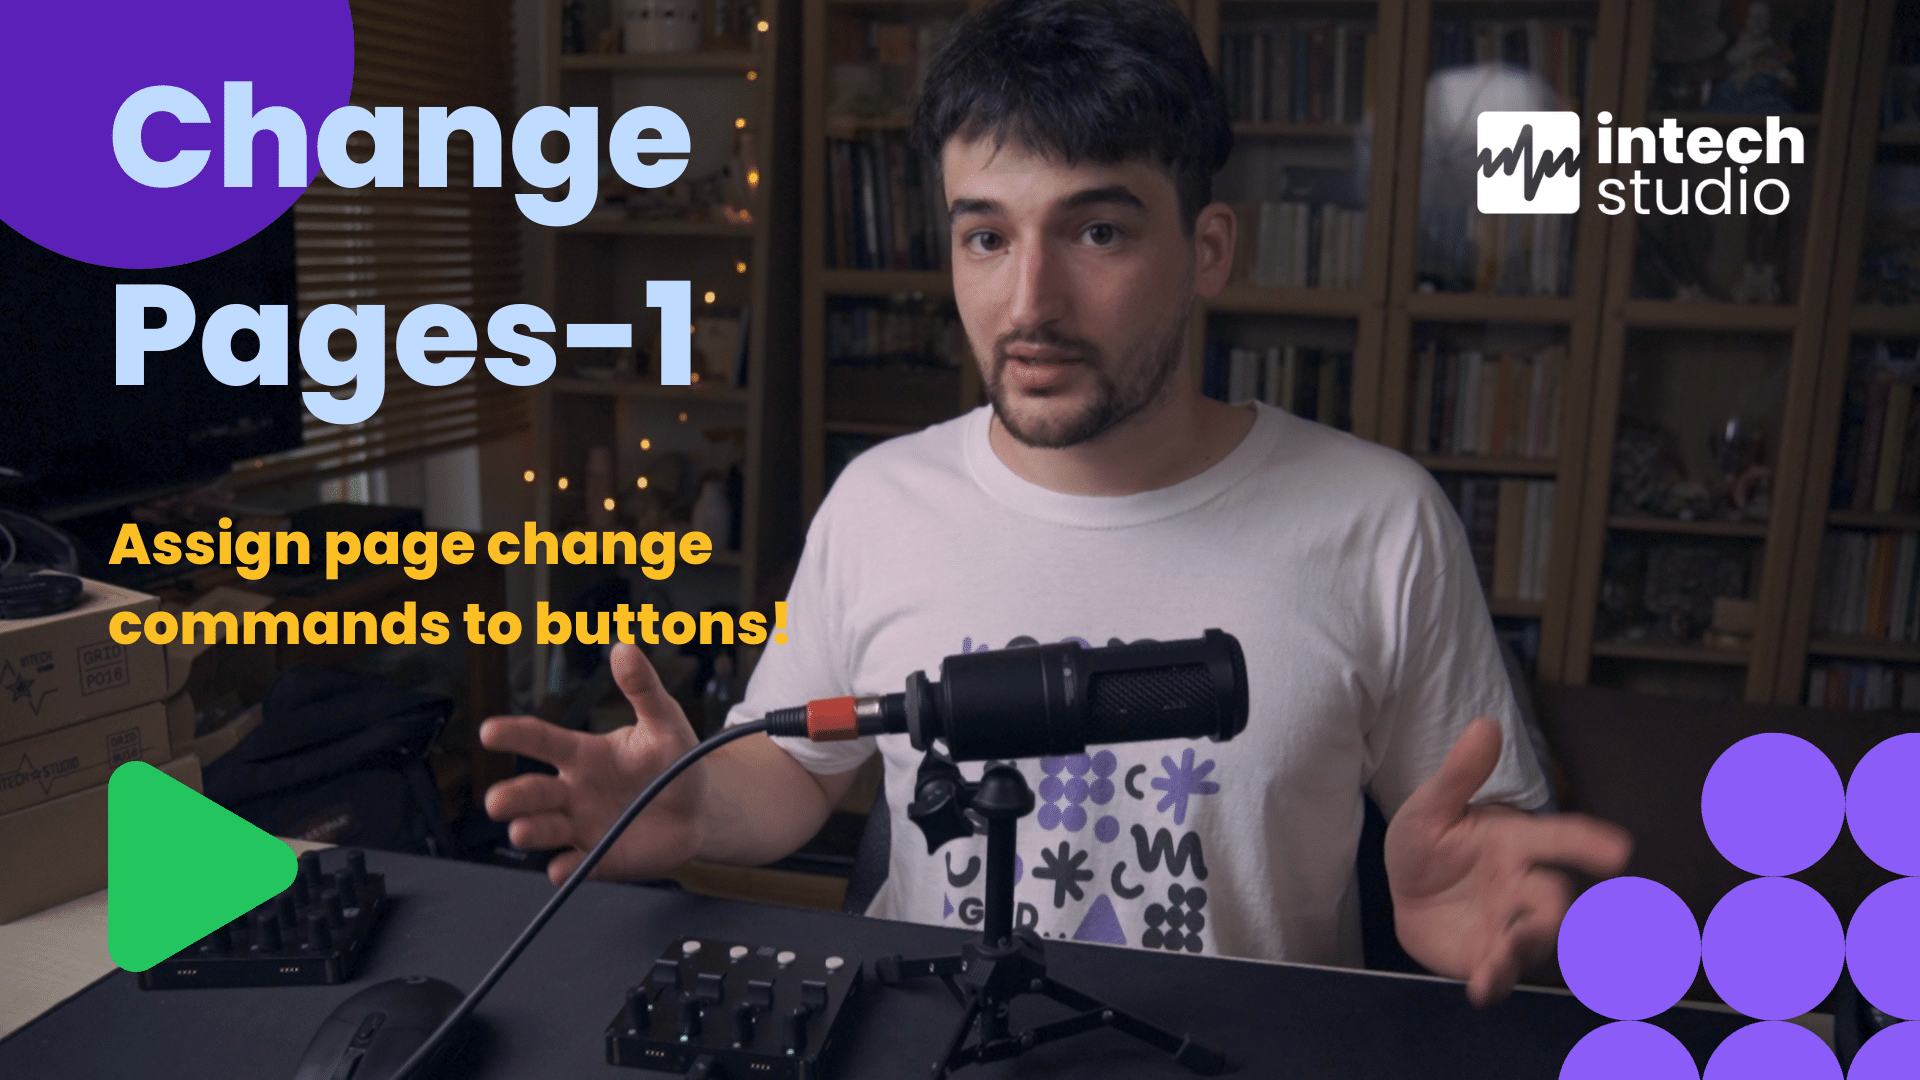 3 simple ways to change pages with buttons or encoders